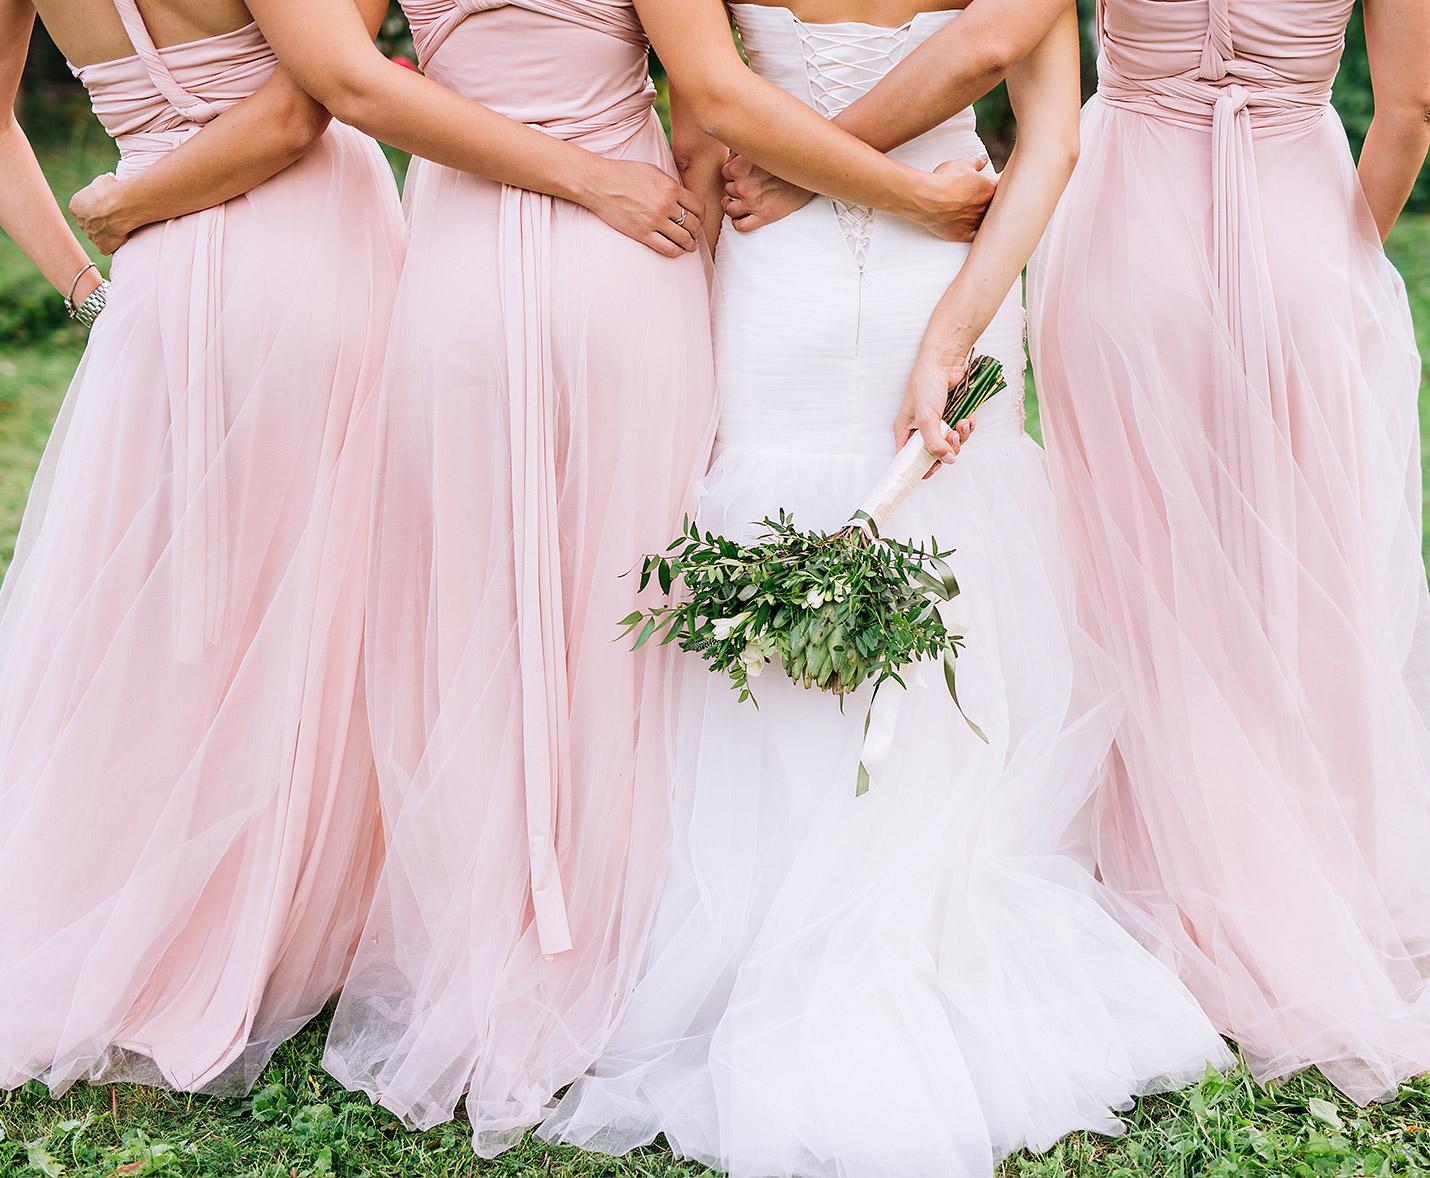 A bride and her bridesmaid with their backs to the camers